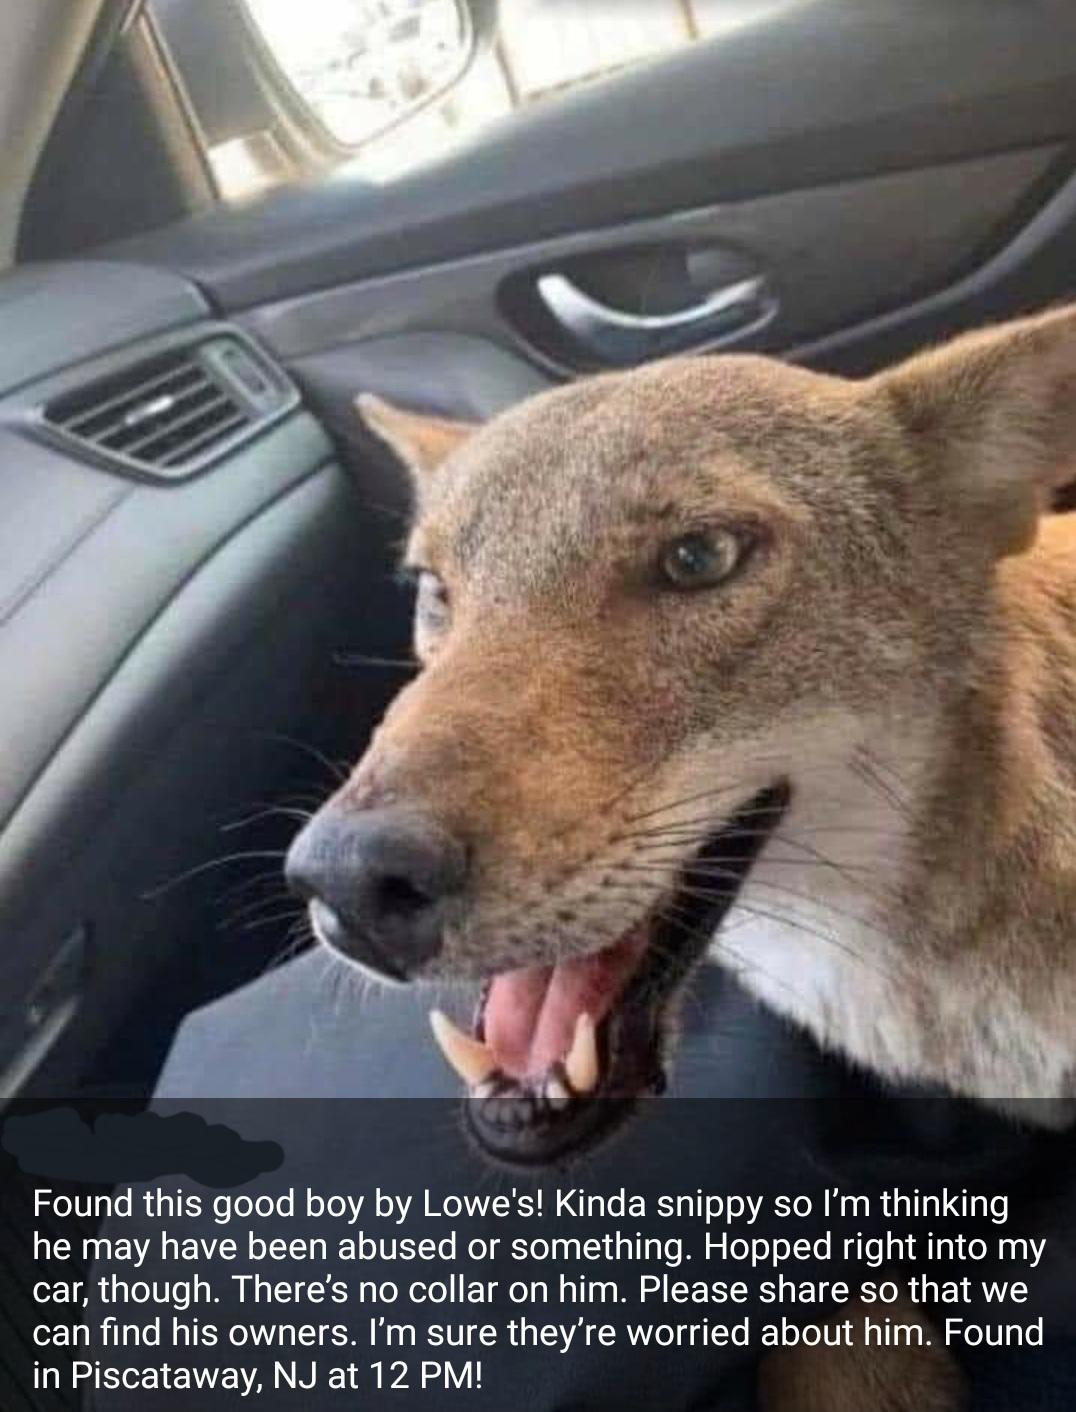 Cringe, Facebook, Rutgers, KuMf, Piscataway, NJ cringe memes Cringe, Facebook, Rutgers, KuMf, Piscataway, NJ text: Found this good boy by Lowe's! Kinda snippy so I'm thinking he may have been abused or something. Hopped right into my car, though. There's no collar on him. Please share so that we can find his owners. I'm sure they're worried about him. Found in Piscataway, NJ at 12 PM! 